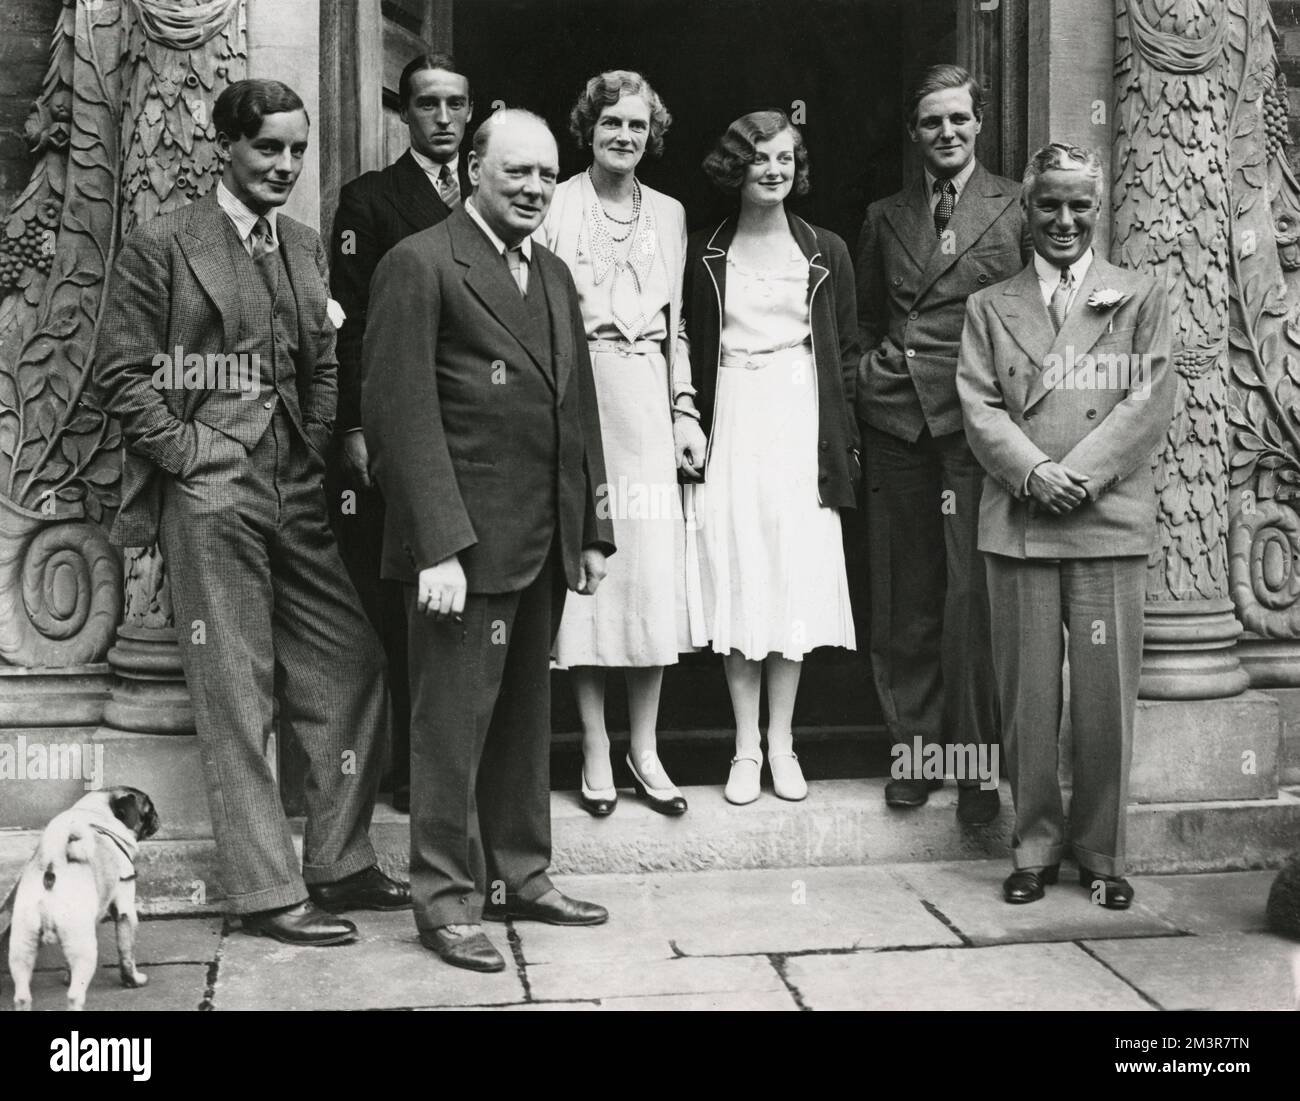 Charlie Chaplin (far right) with Mr and Mrs Winston Churchill and members of a house party at Chartwell Manor, Churchill's Westerham estate in Kent, 19th September 1931. Churchill is in the front row, third figure from left; Clementine Churchill is fourth from left; their eldest daughter Diana Churchill is third from right; their son Randolph is second from right.     Date: 1931 Stock Photo